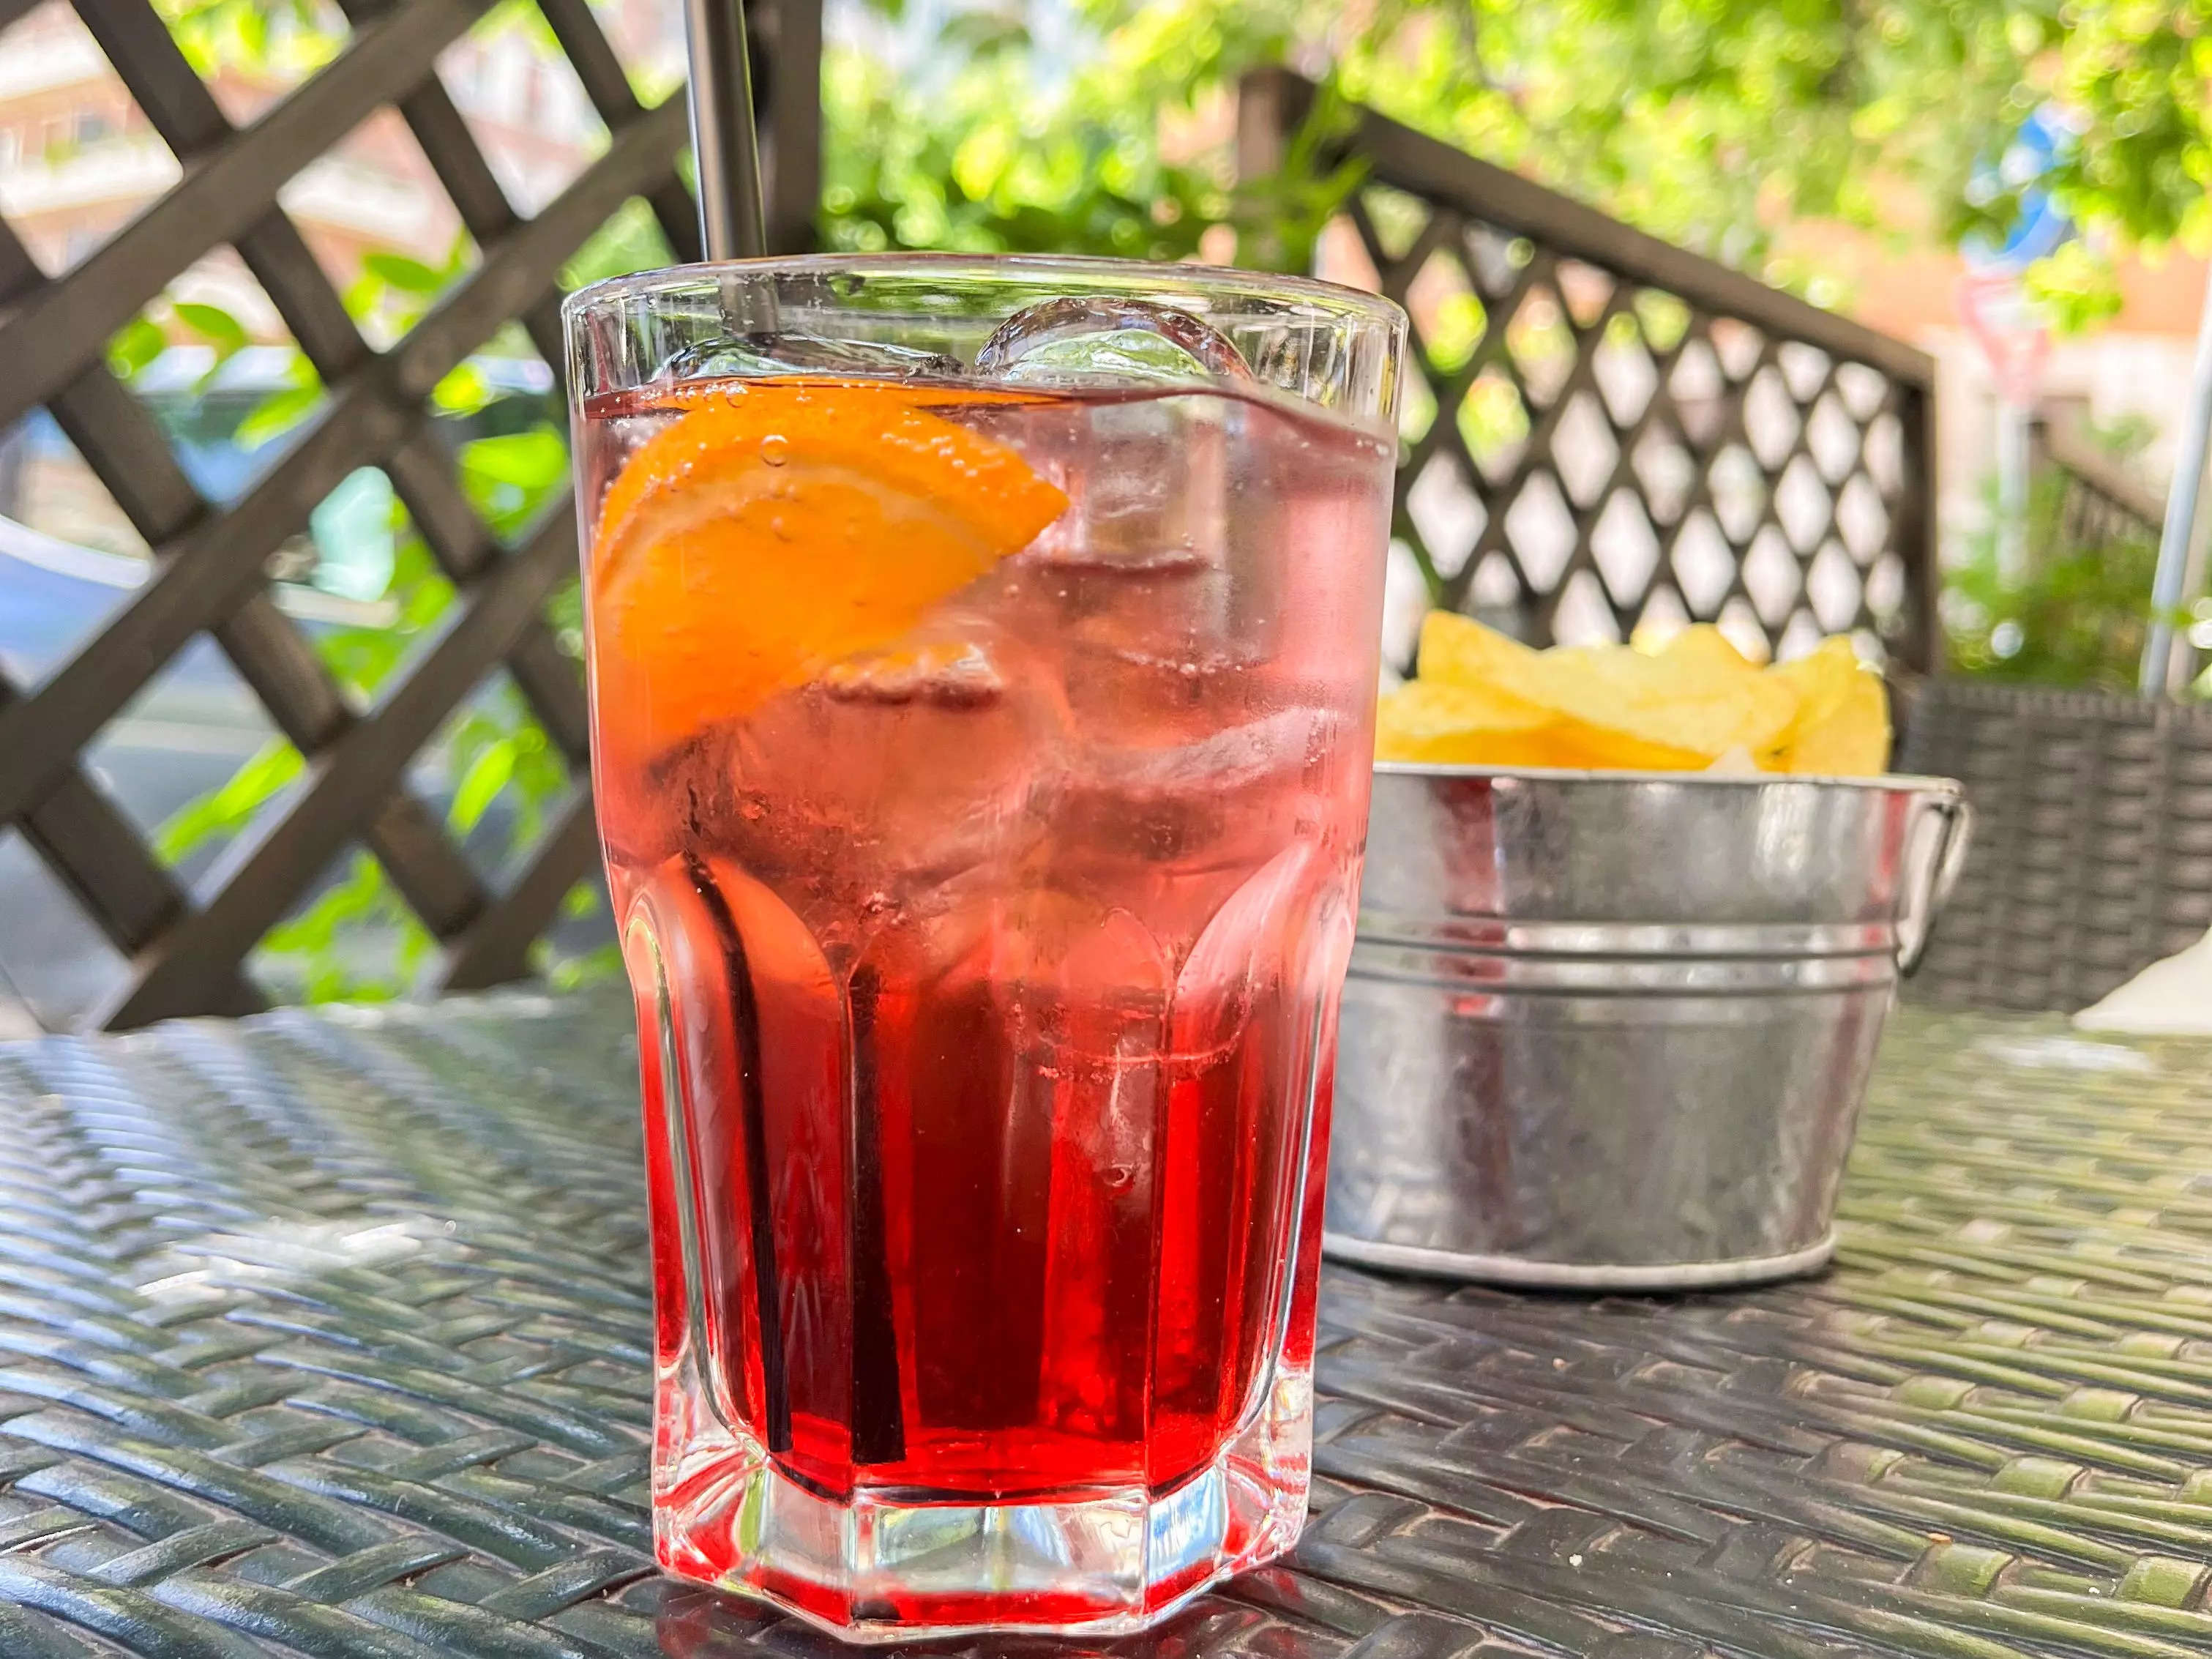 A Campari Spritz on a table with potato chips.